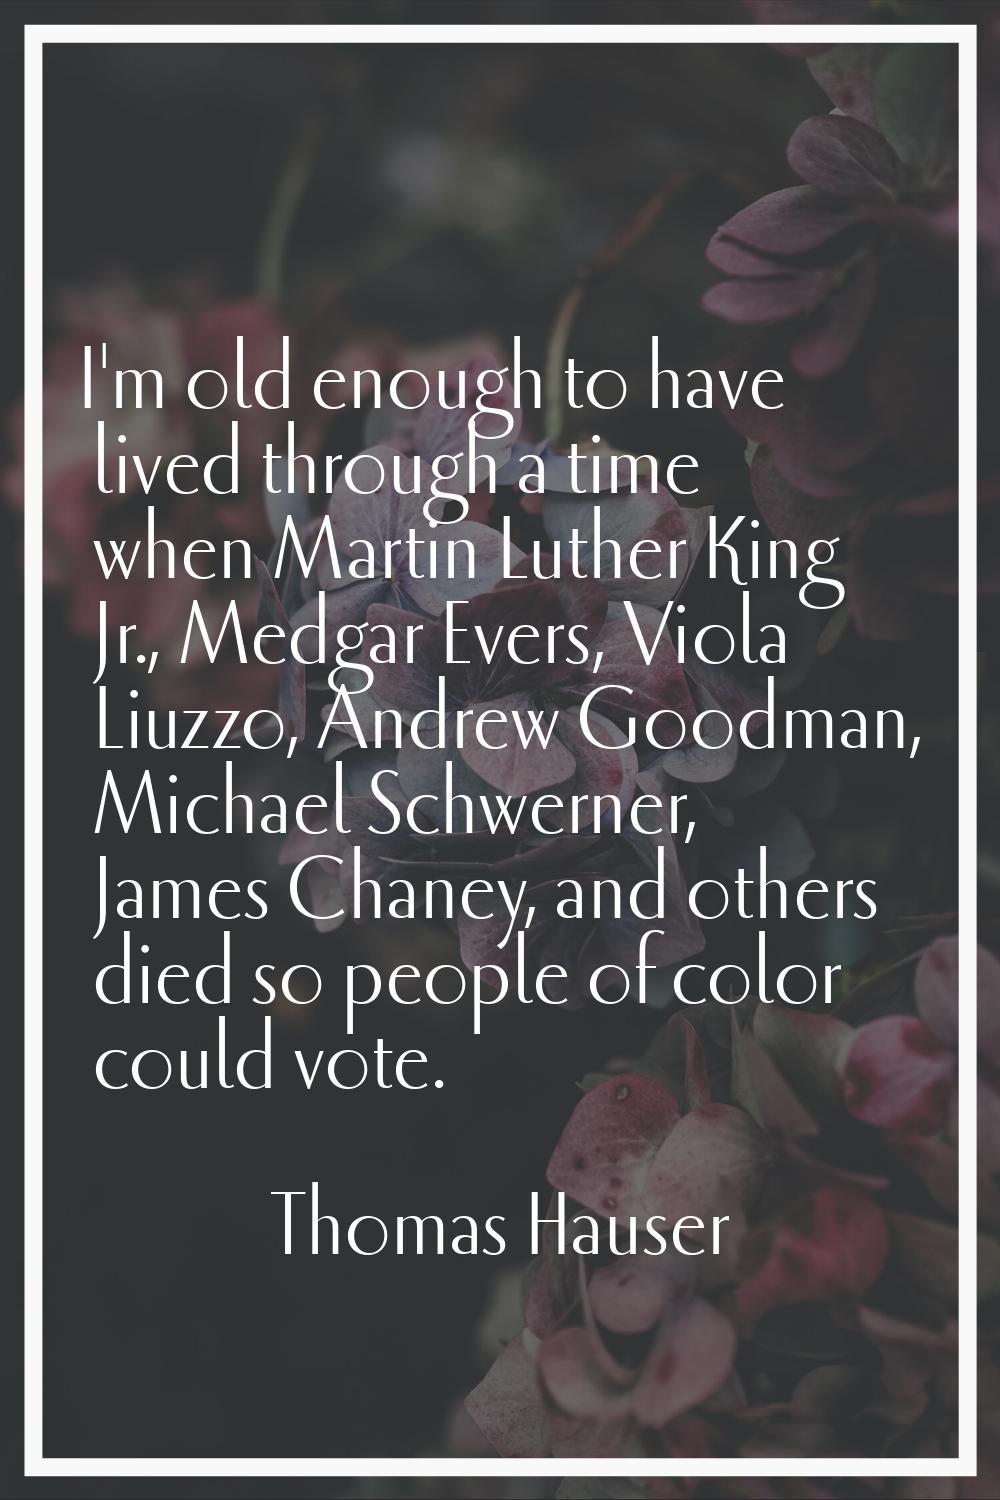 I'm old enough to have lived through a time when Martin Luther King Jr., Medgar Evers, Viola Liuzzo